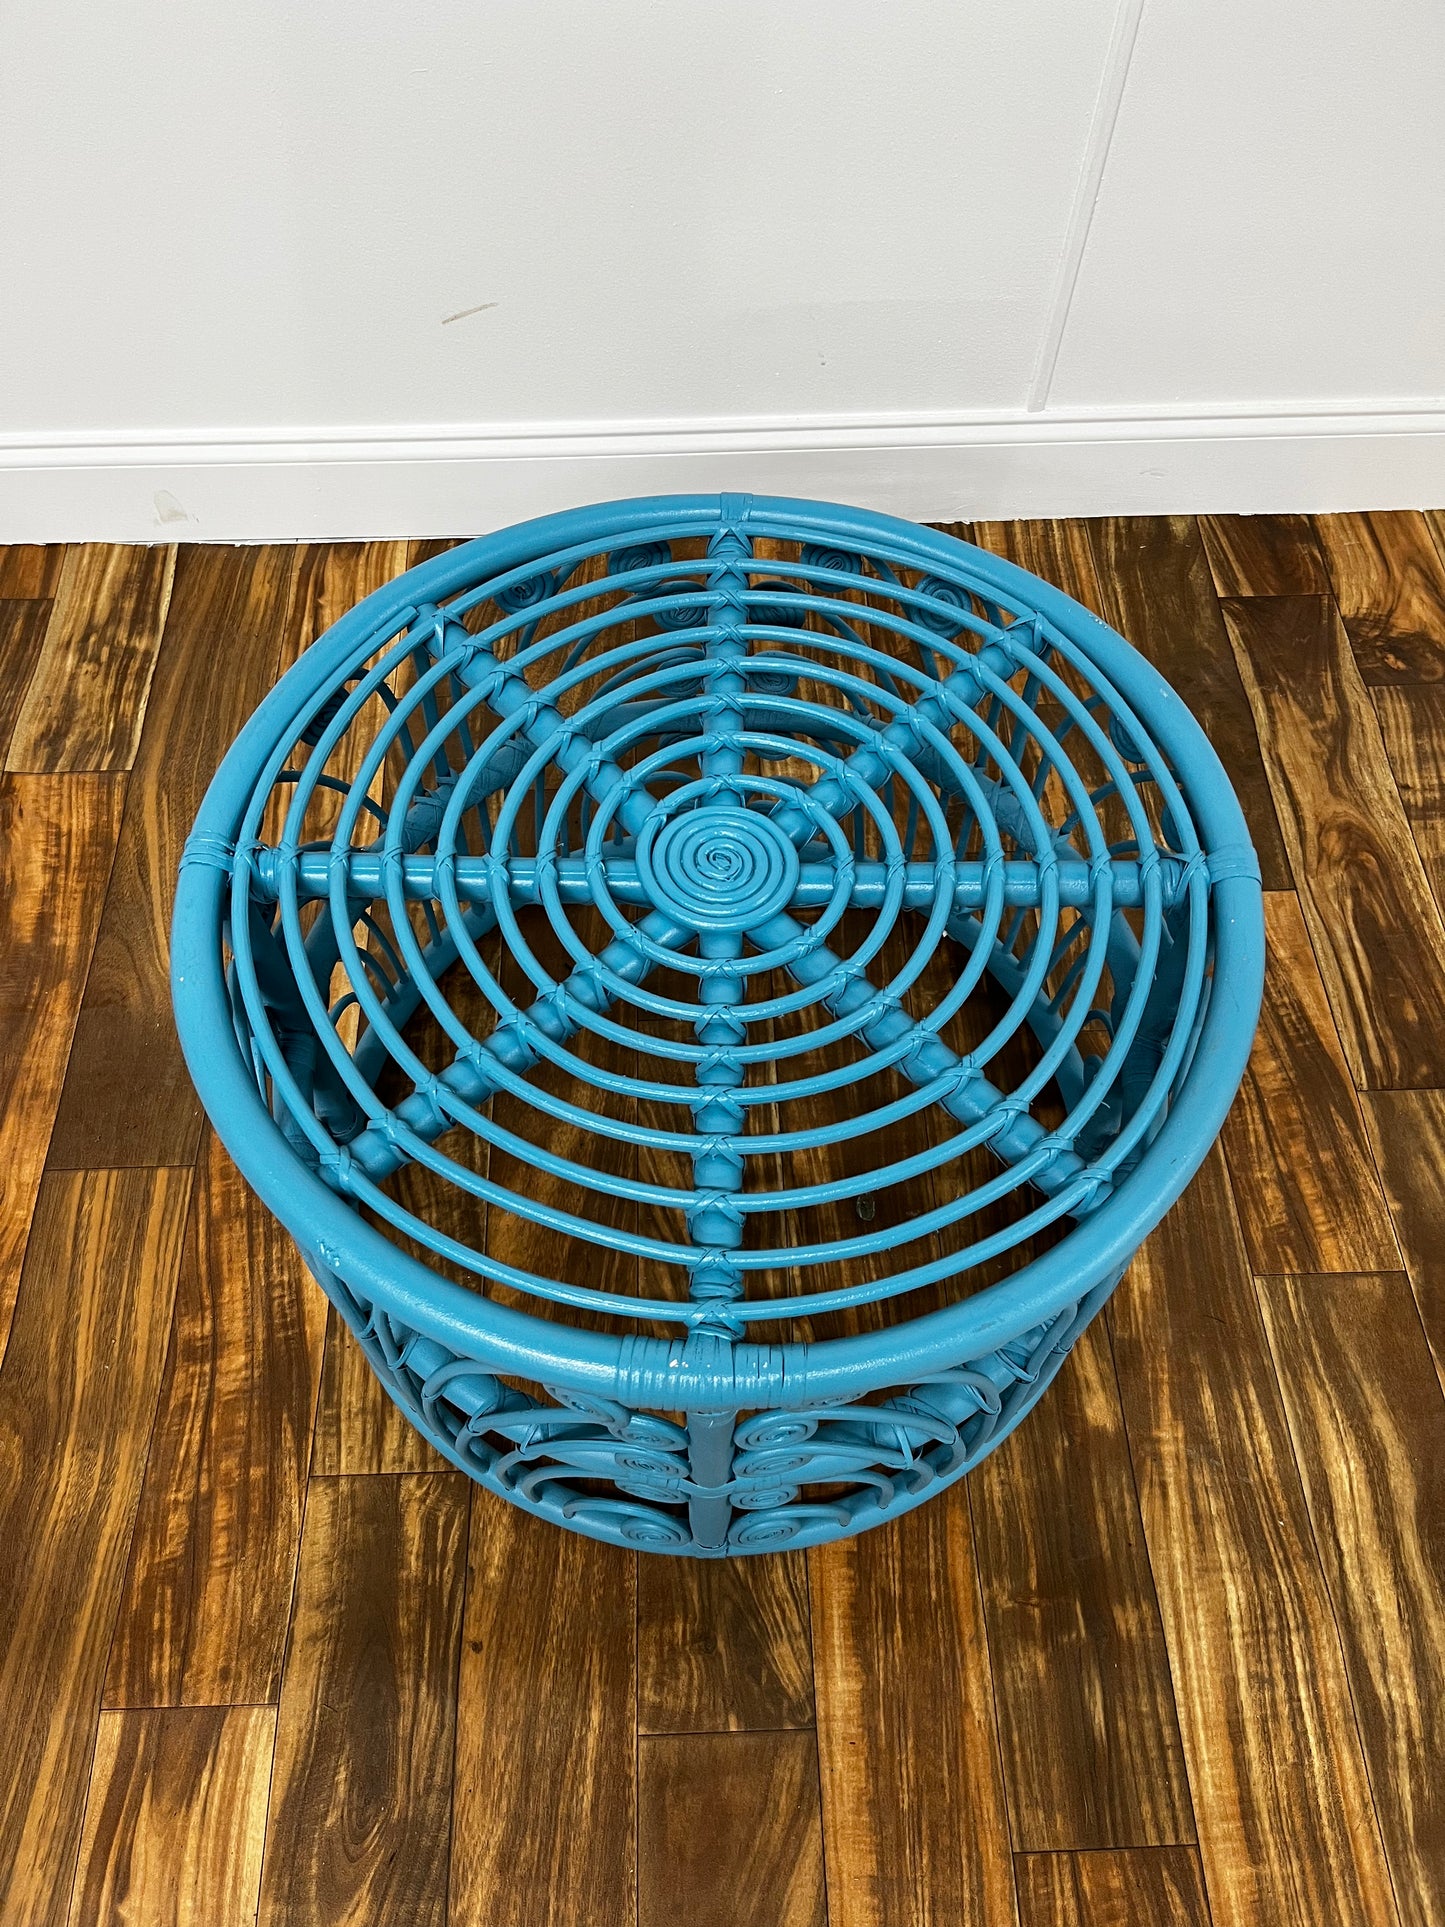 BLUE RATTAN COFFEE TABLE / ACCENT TABLE